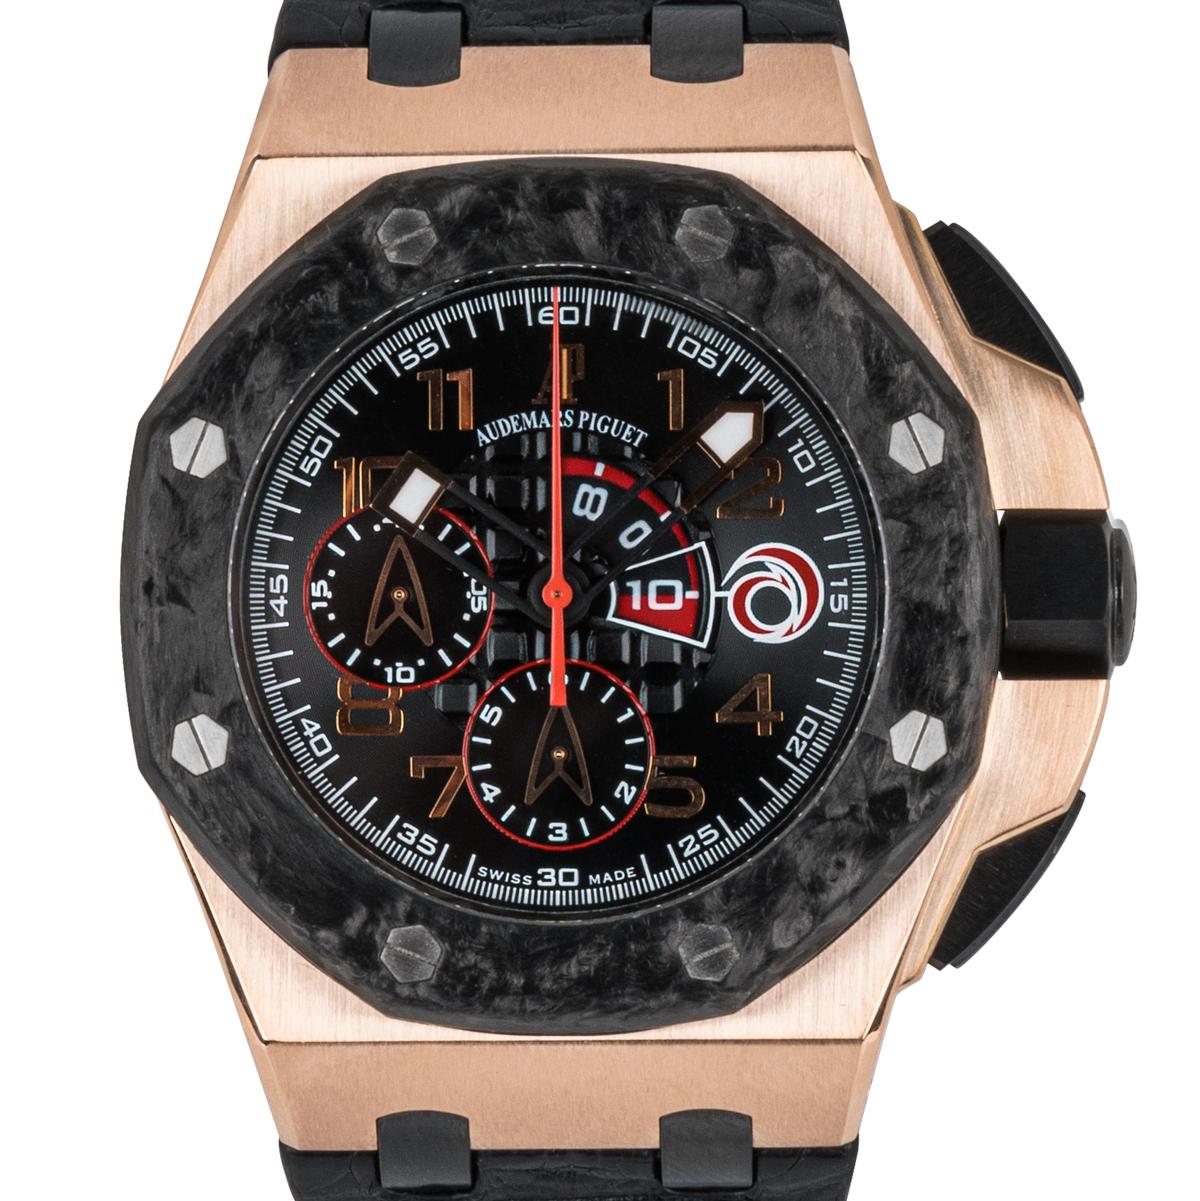 A men's limited edition Royal Oak Offshore Team Alinghi, crafted in rose gold by Audemars Piguet. Features a distinctive black tapisserie design with bold applied arabic numbers. Equipped with a flyback chronograph function and two sub dials